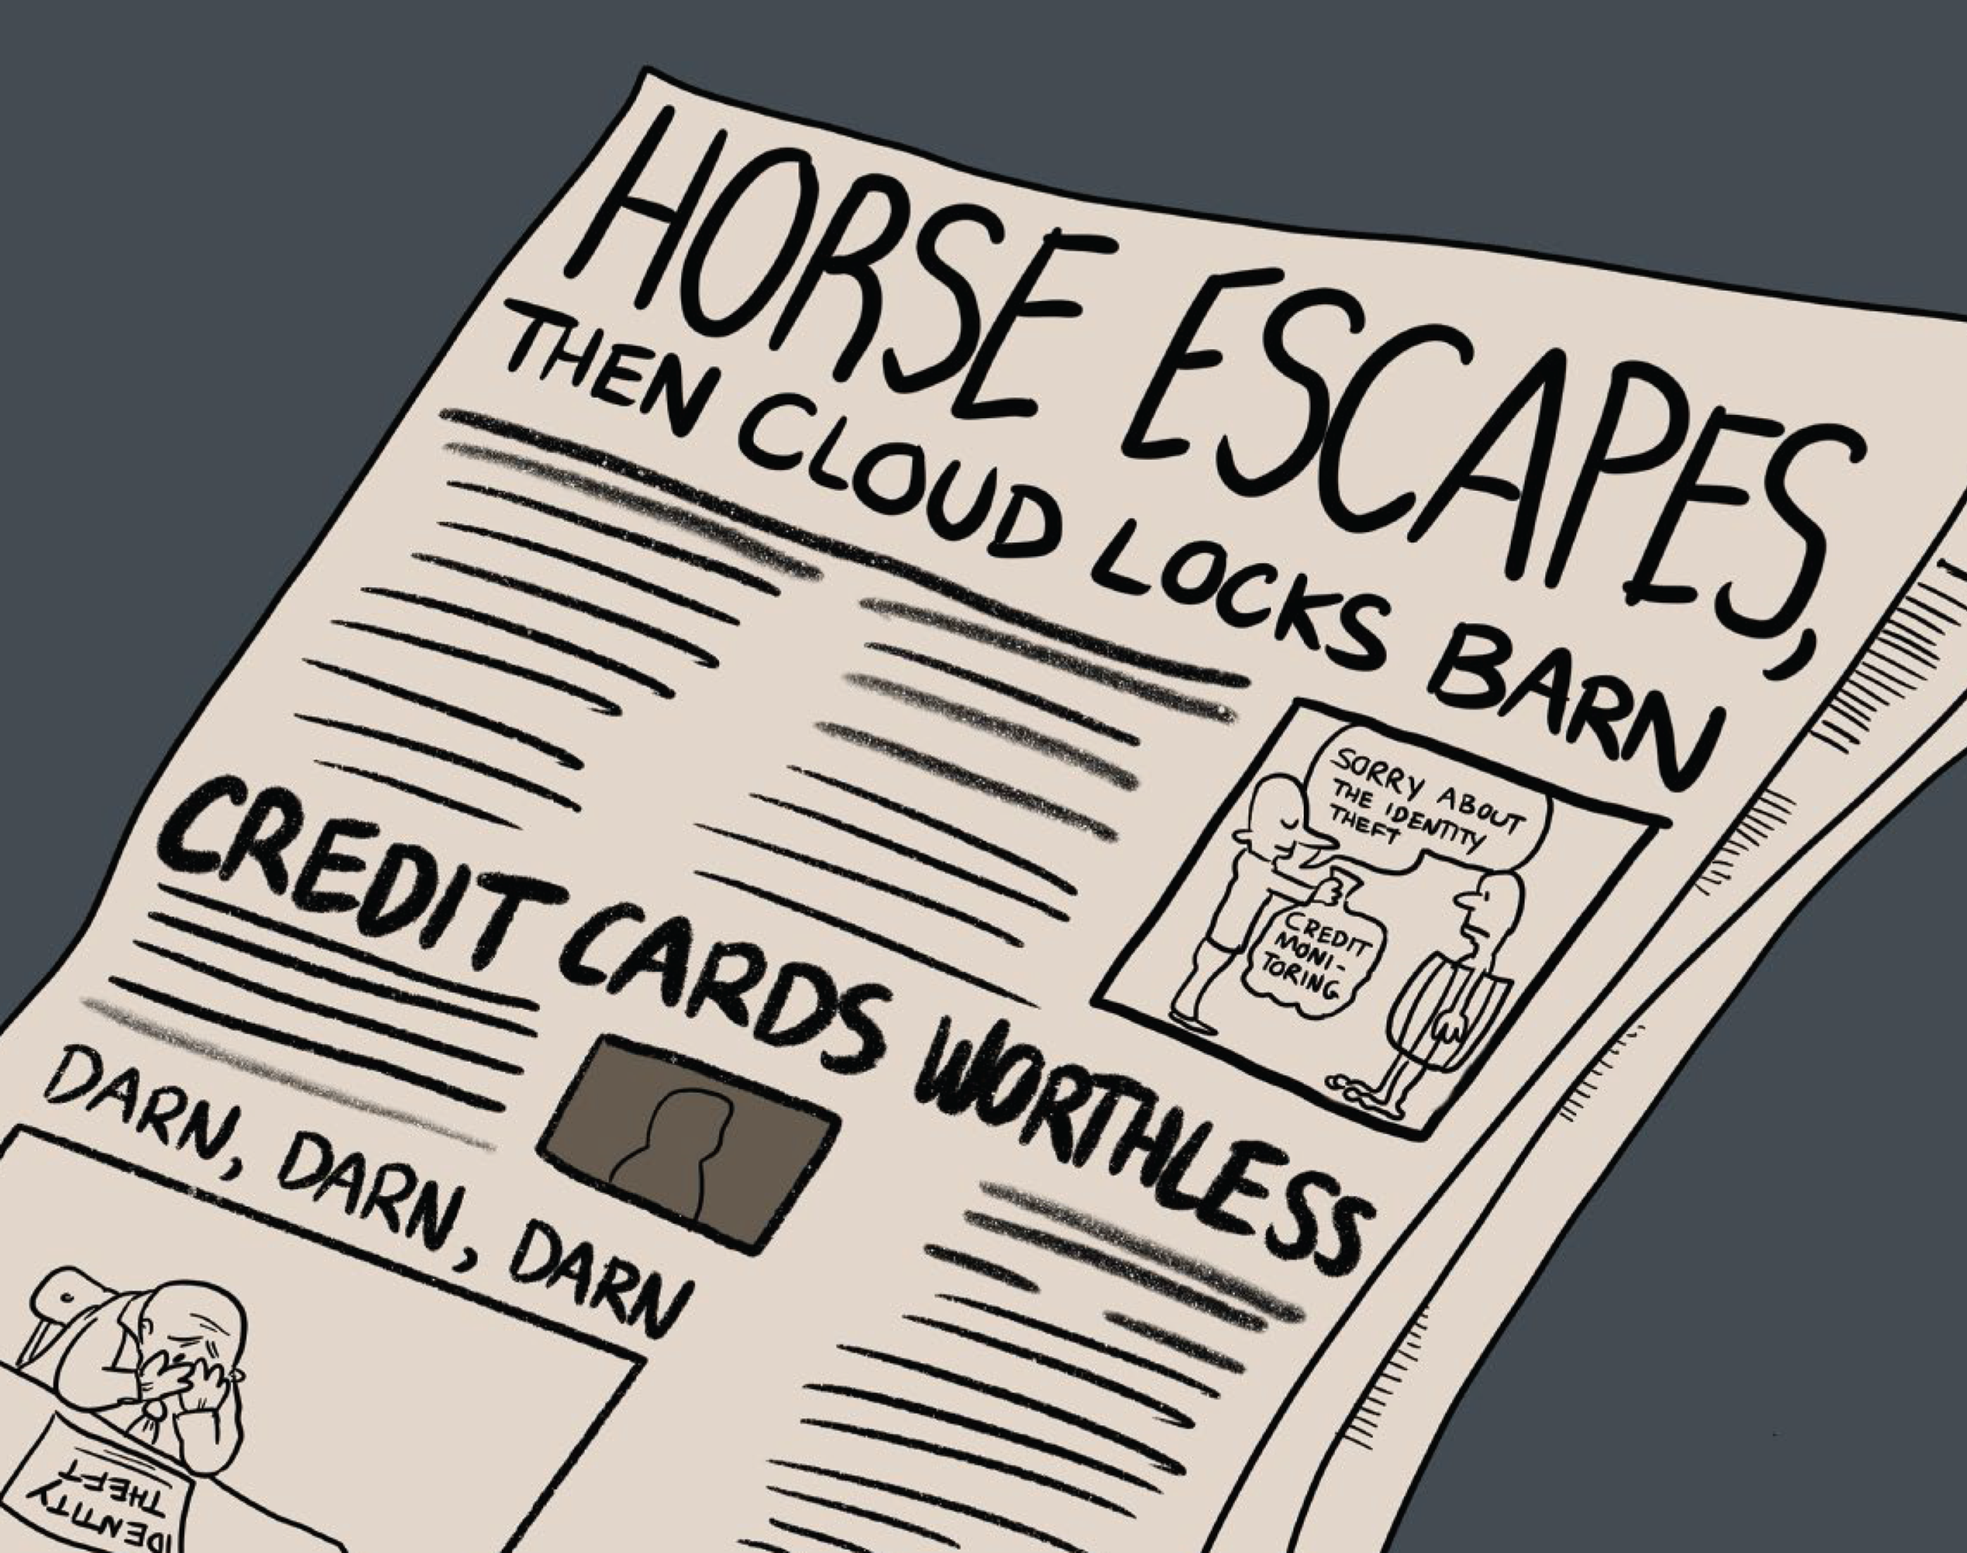 Cartoon illustration of a newspaper displaying the news about the escape of a horse.